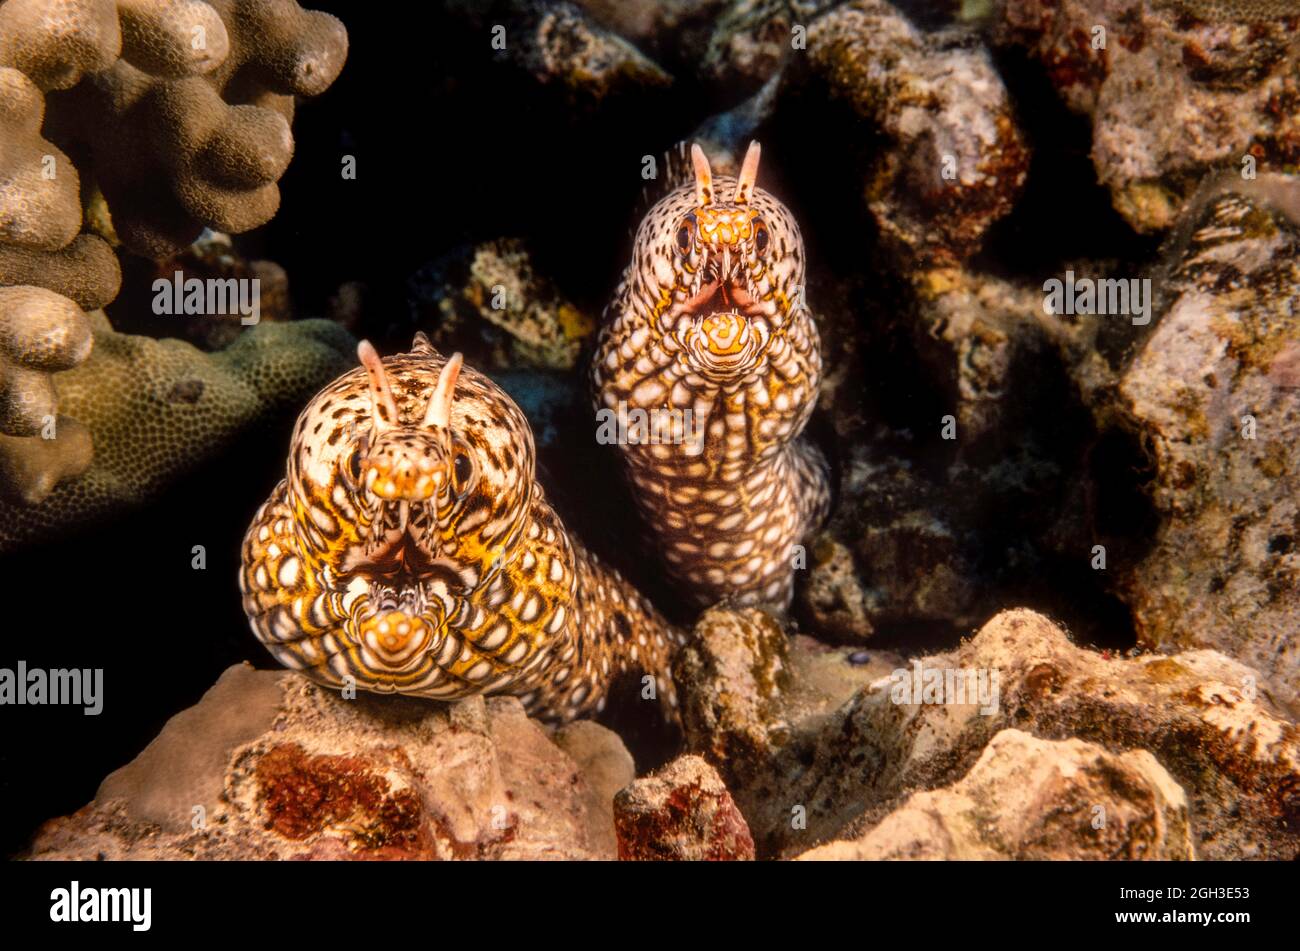 A pair of dragon moray eels, Enchelycore pardalis, off the island of Maui, Hawaii. Stock Photo